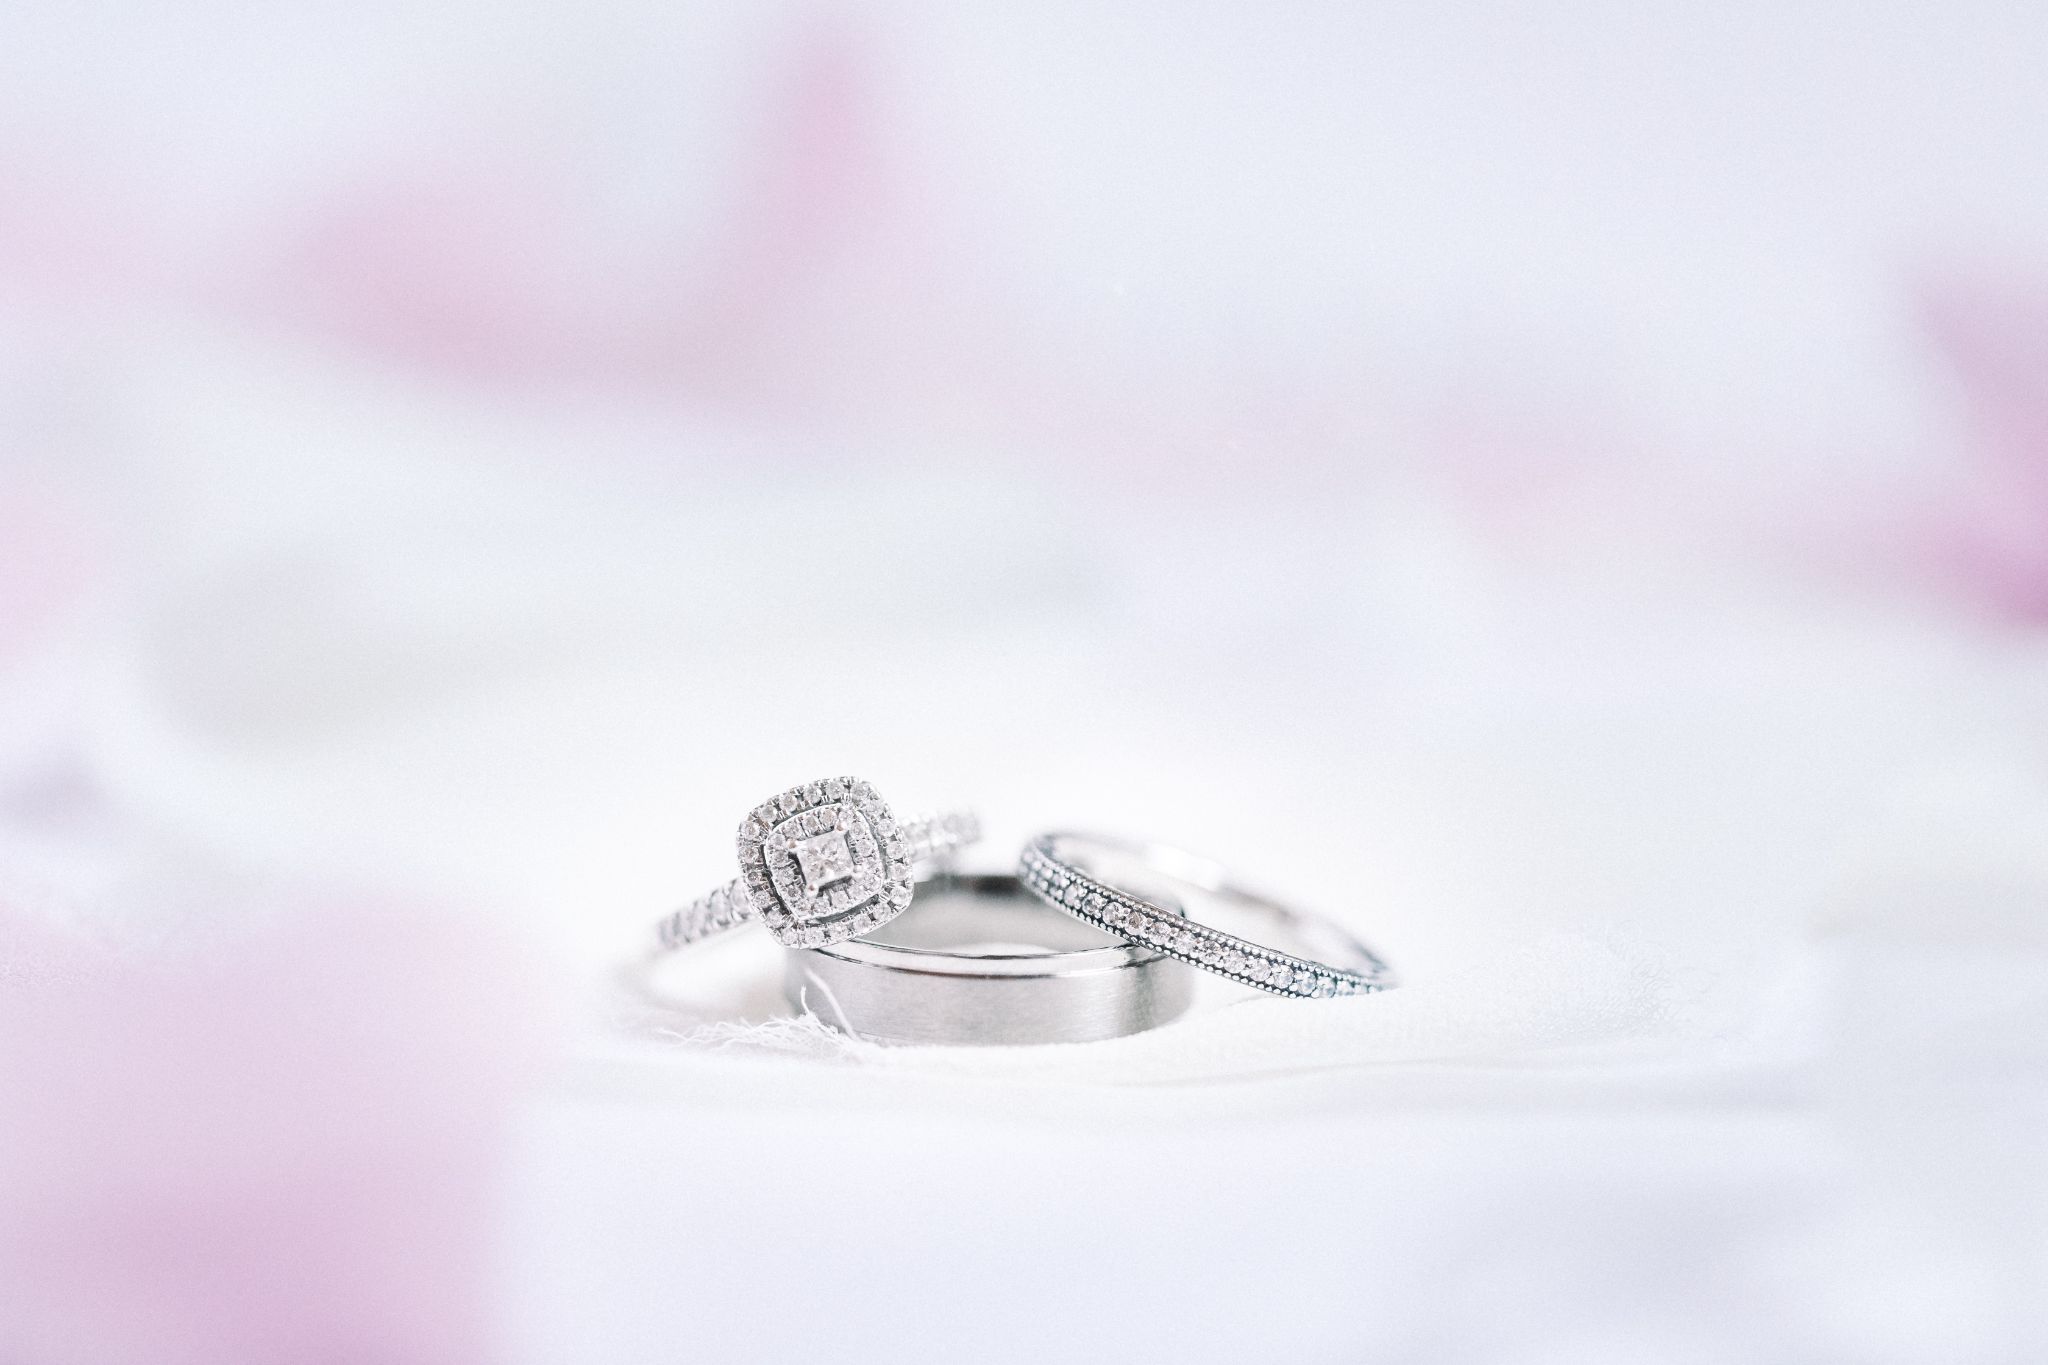 Wedding Band that Complements the Engagement Ring